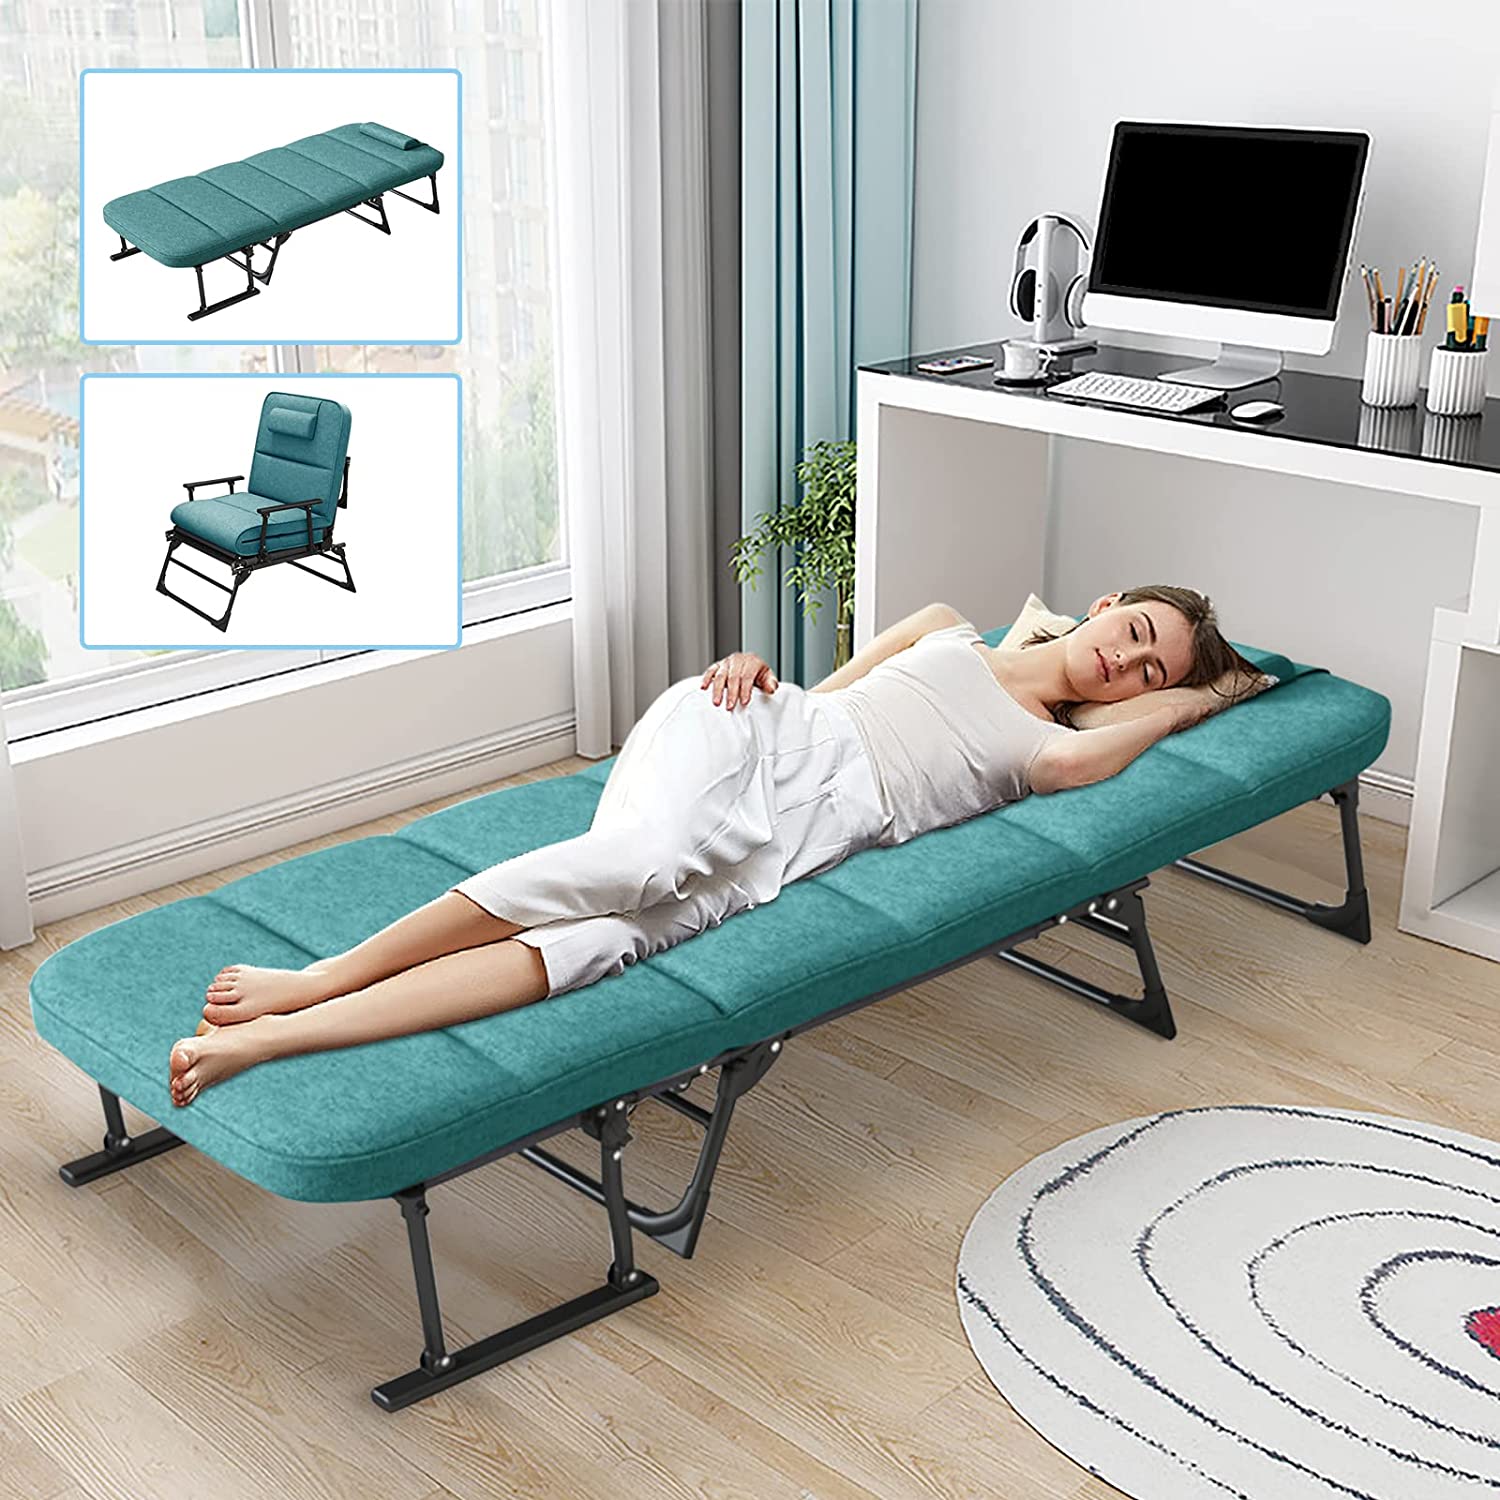 Slsy 3 in 1 Folding Sofa Bed with Mattress & Pillow, 6 Position Adjustable Folding Guest Beds Spare Bed, Foldaway Convertible Rest Cots for Adults Kids - image 1 of 15